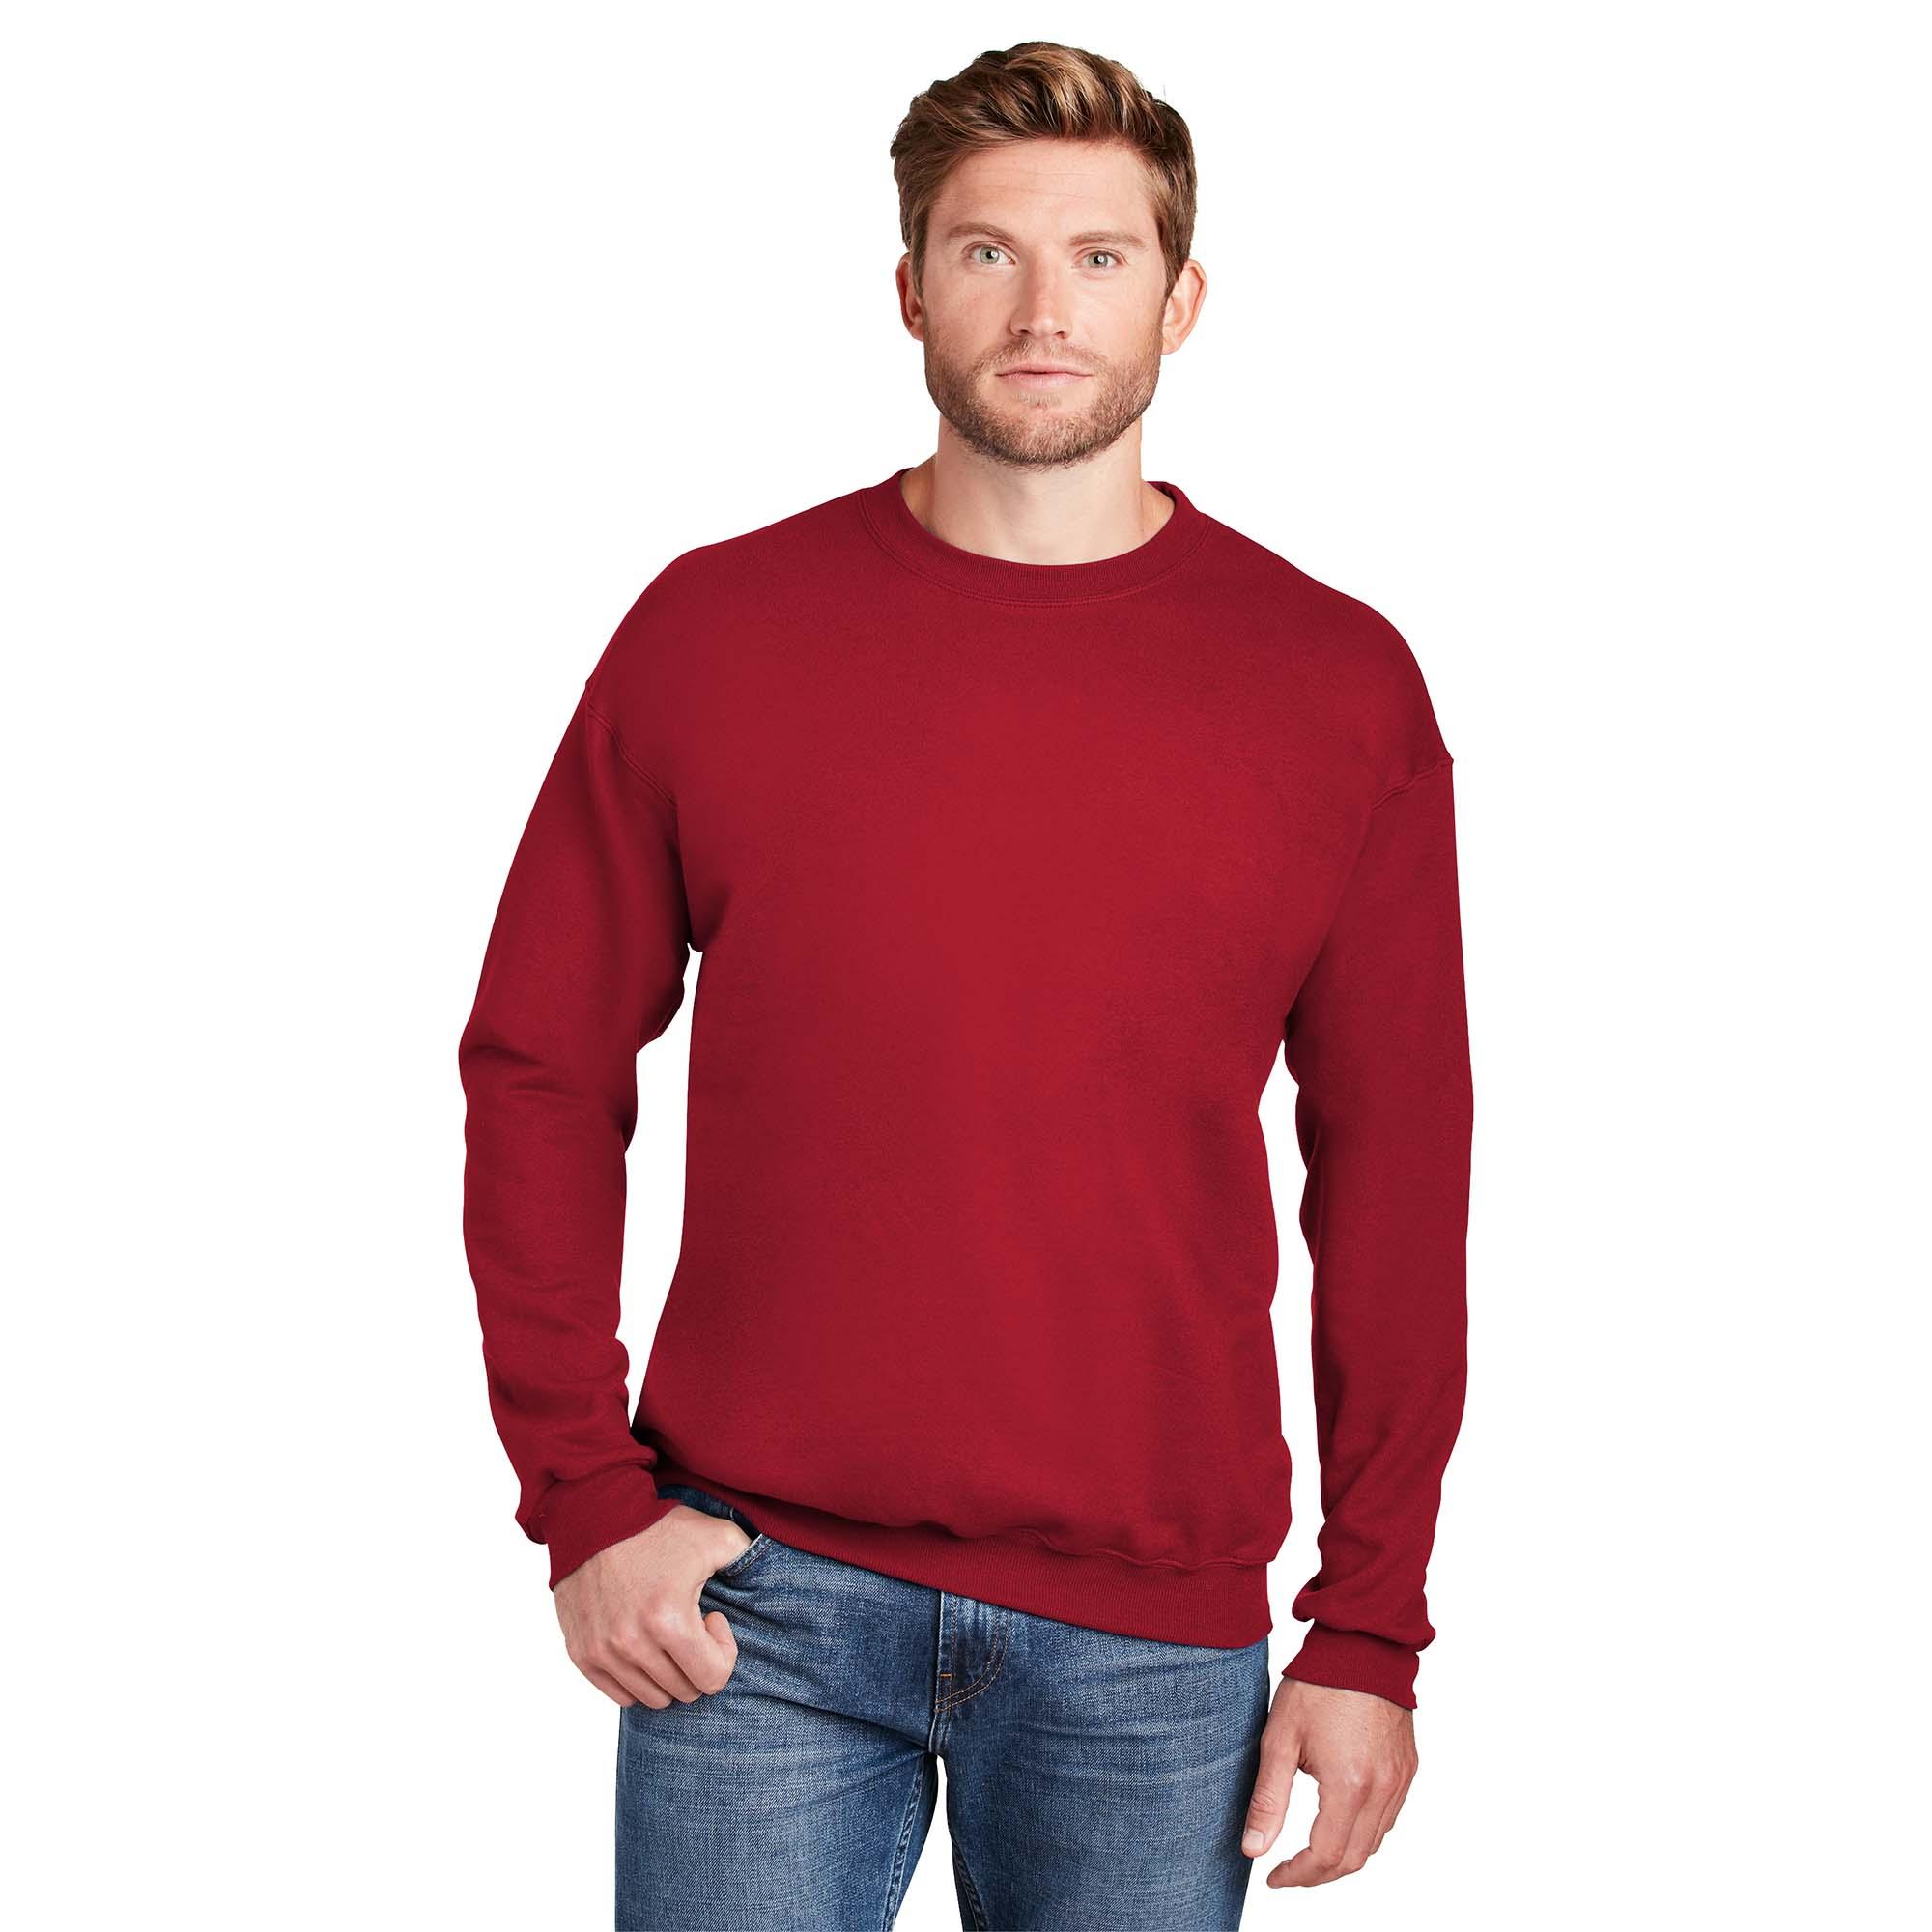 Size Chart for Hanes F260 Mens Ultimate Cotton 90/10 Fleece Crew 